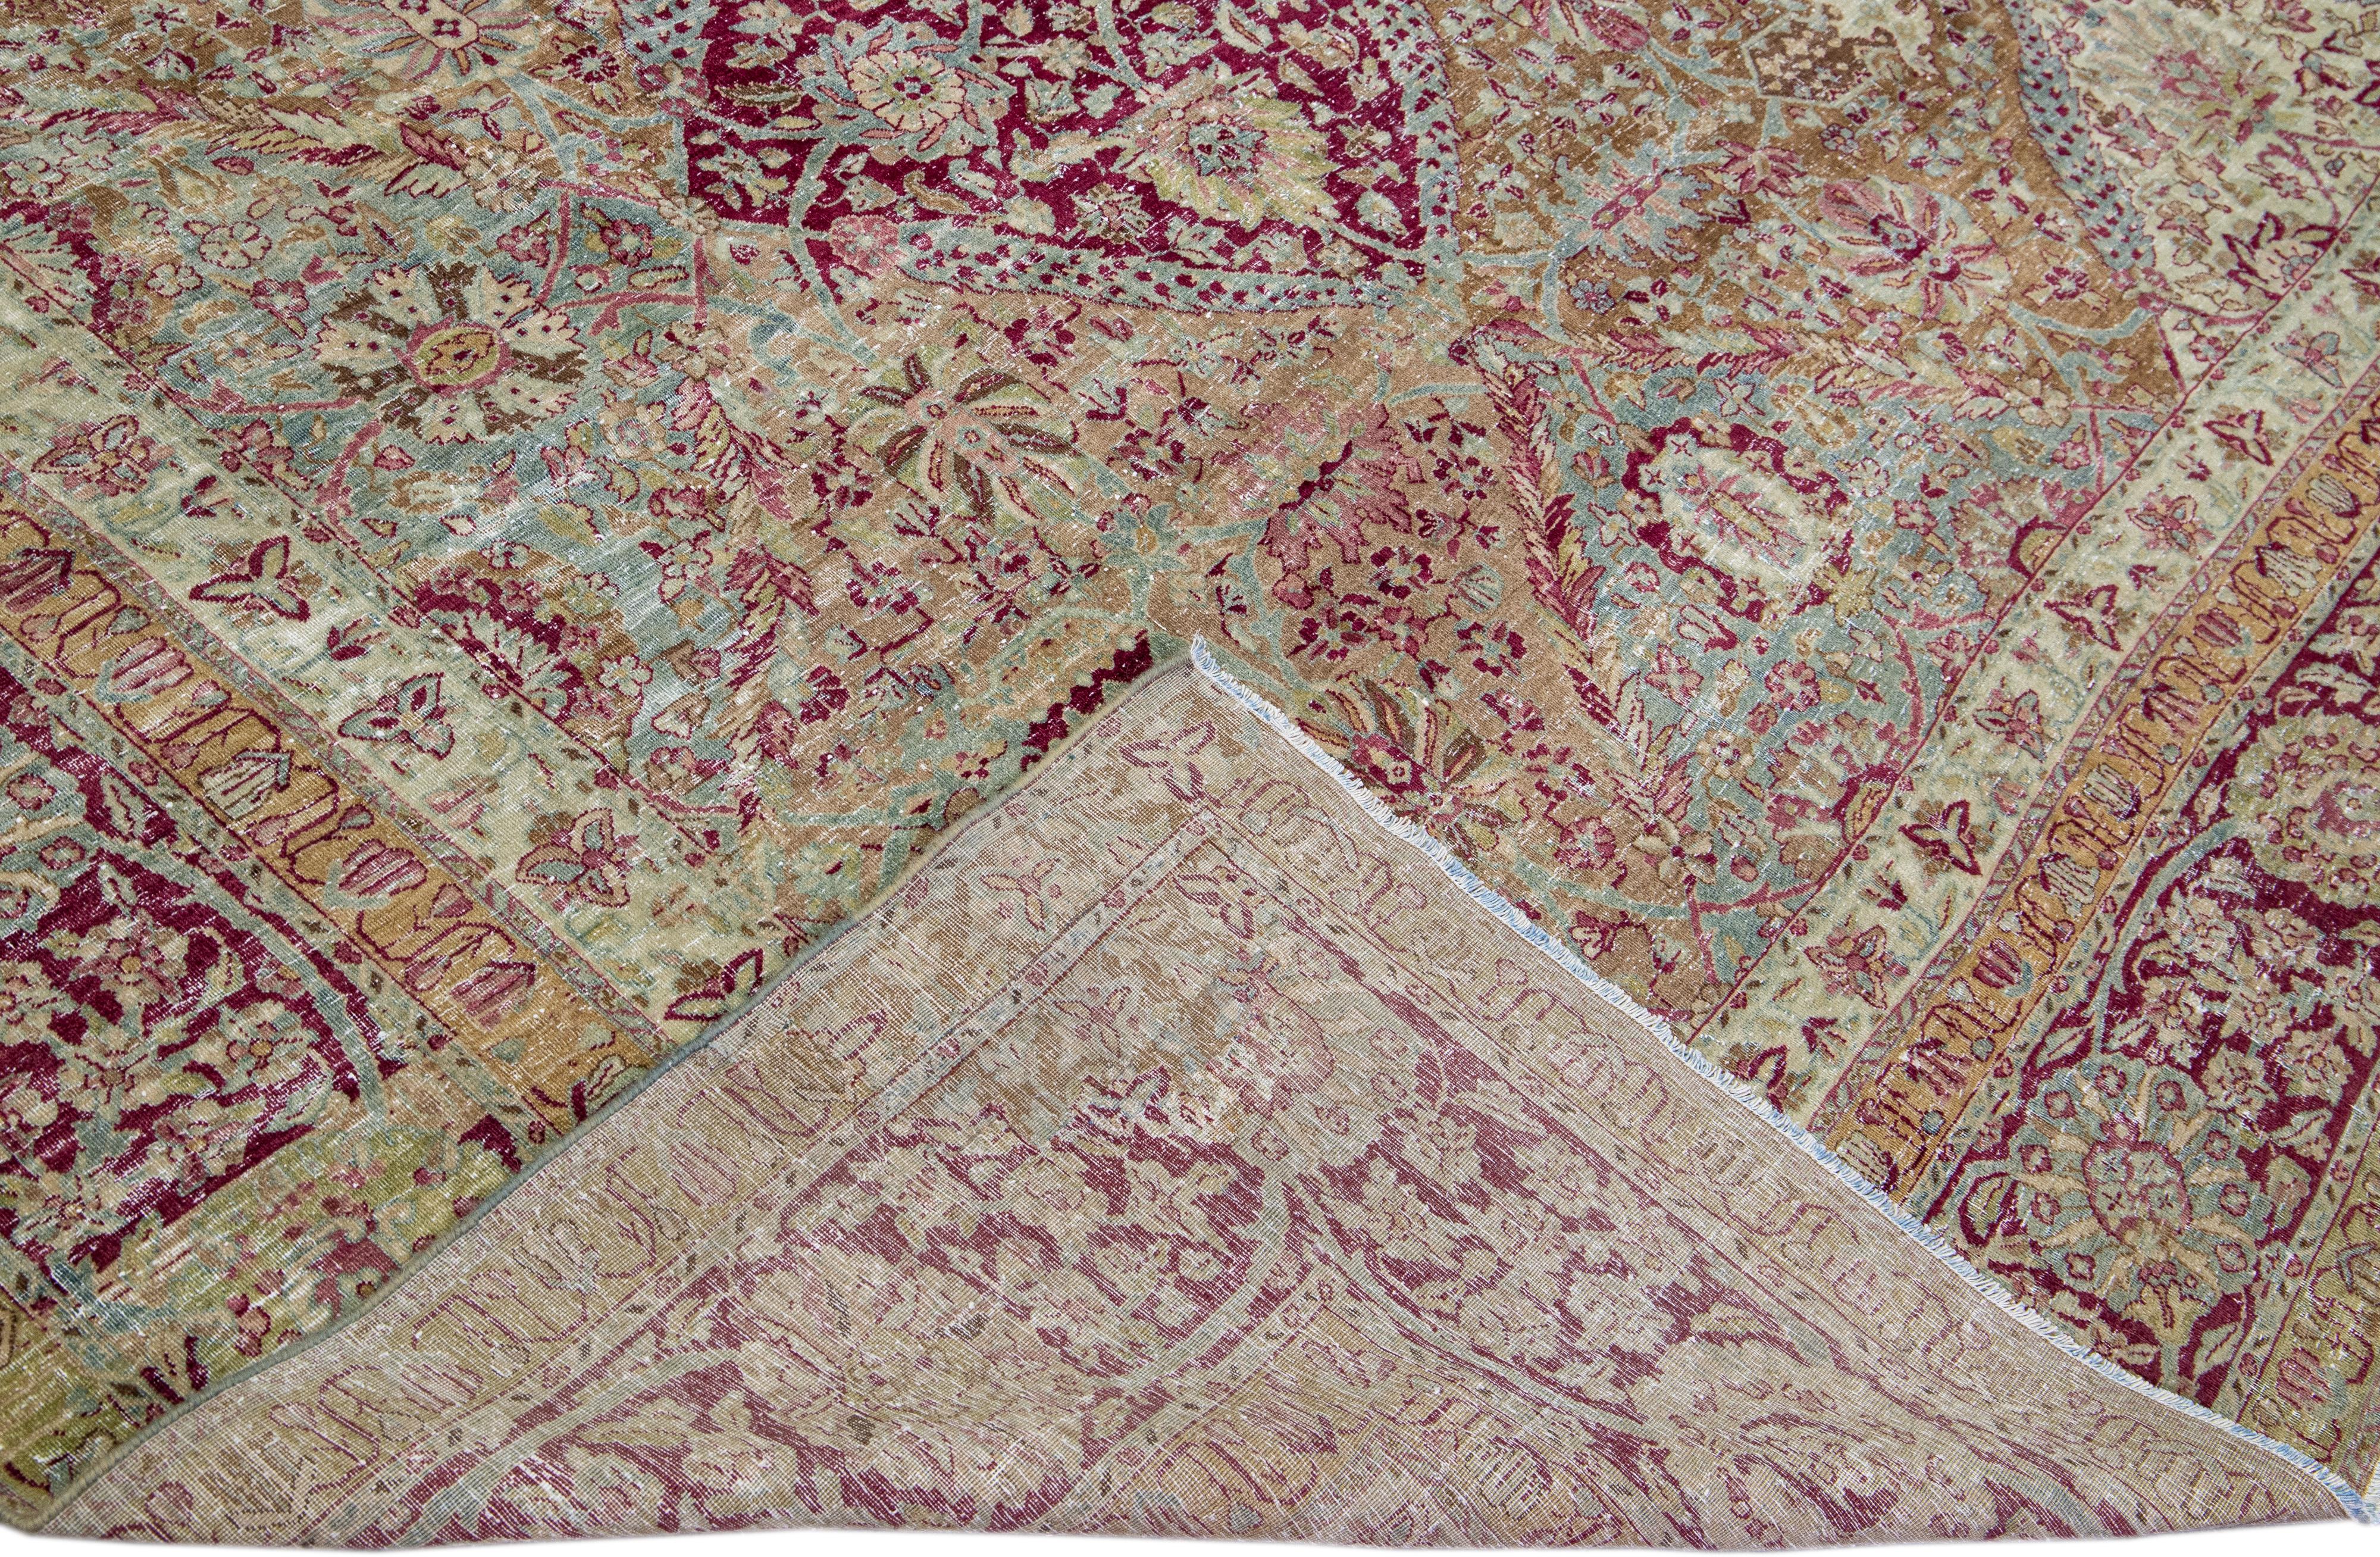 Beautiful antique Kerman hand-knotted wool rug with a brown field. This Kerman rug has a pink and blue accent in a gorgeous all-over floral pattern design.

This rug measures: 12'4